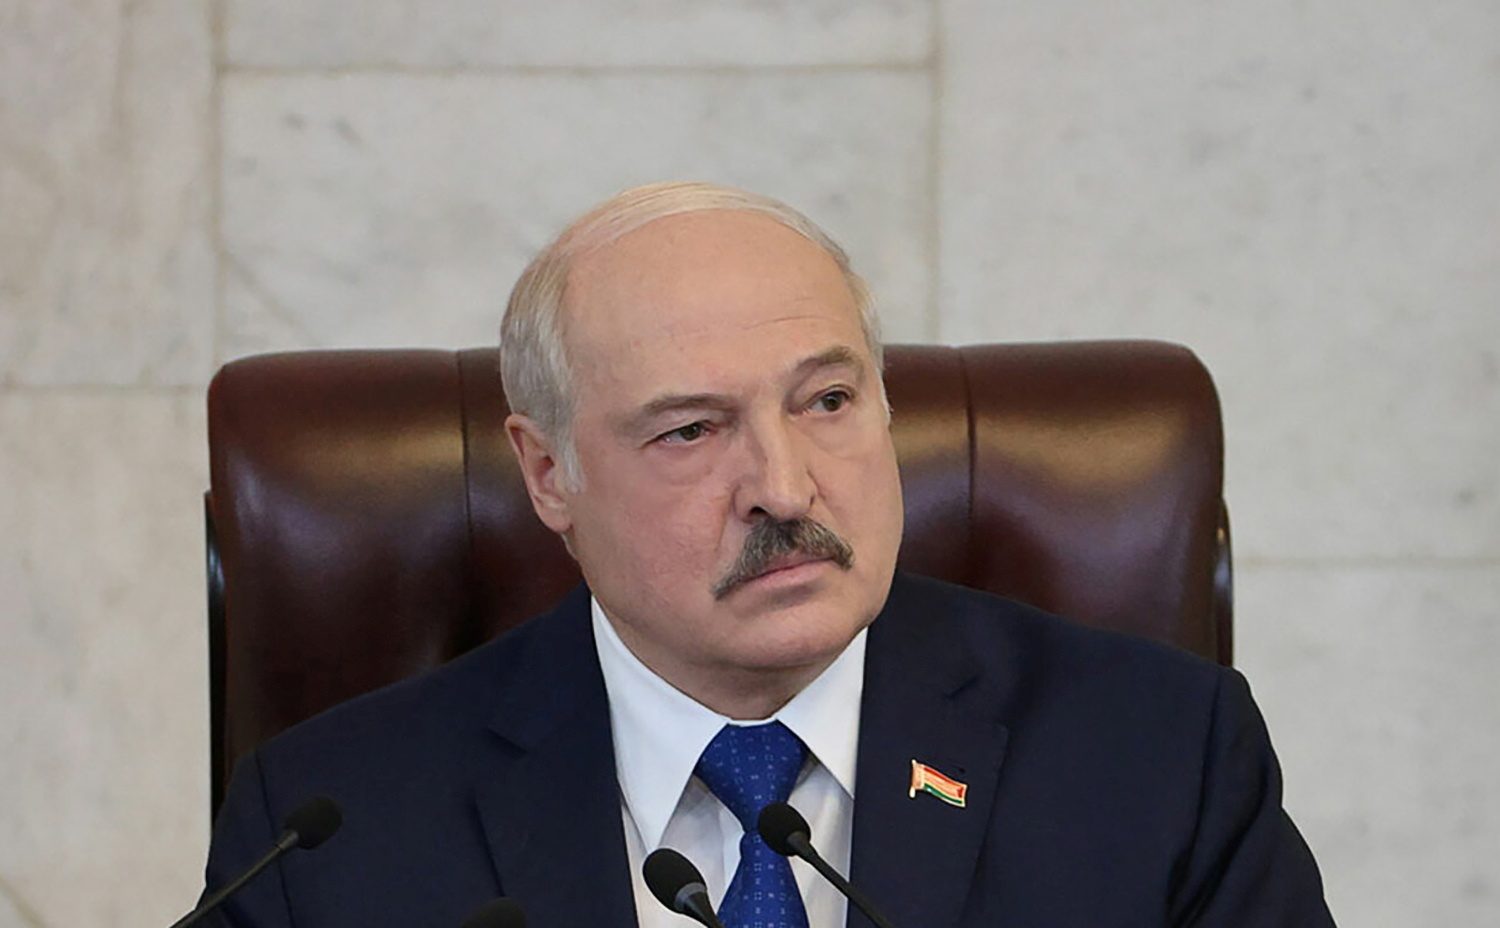 Belarus’ Lukashenko named ‘Person of the Year’ for organized crime and corruption